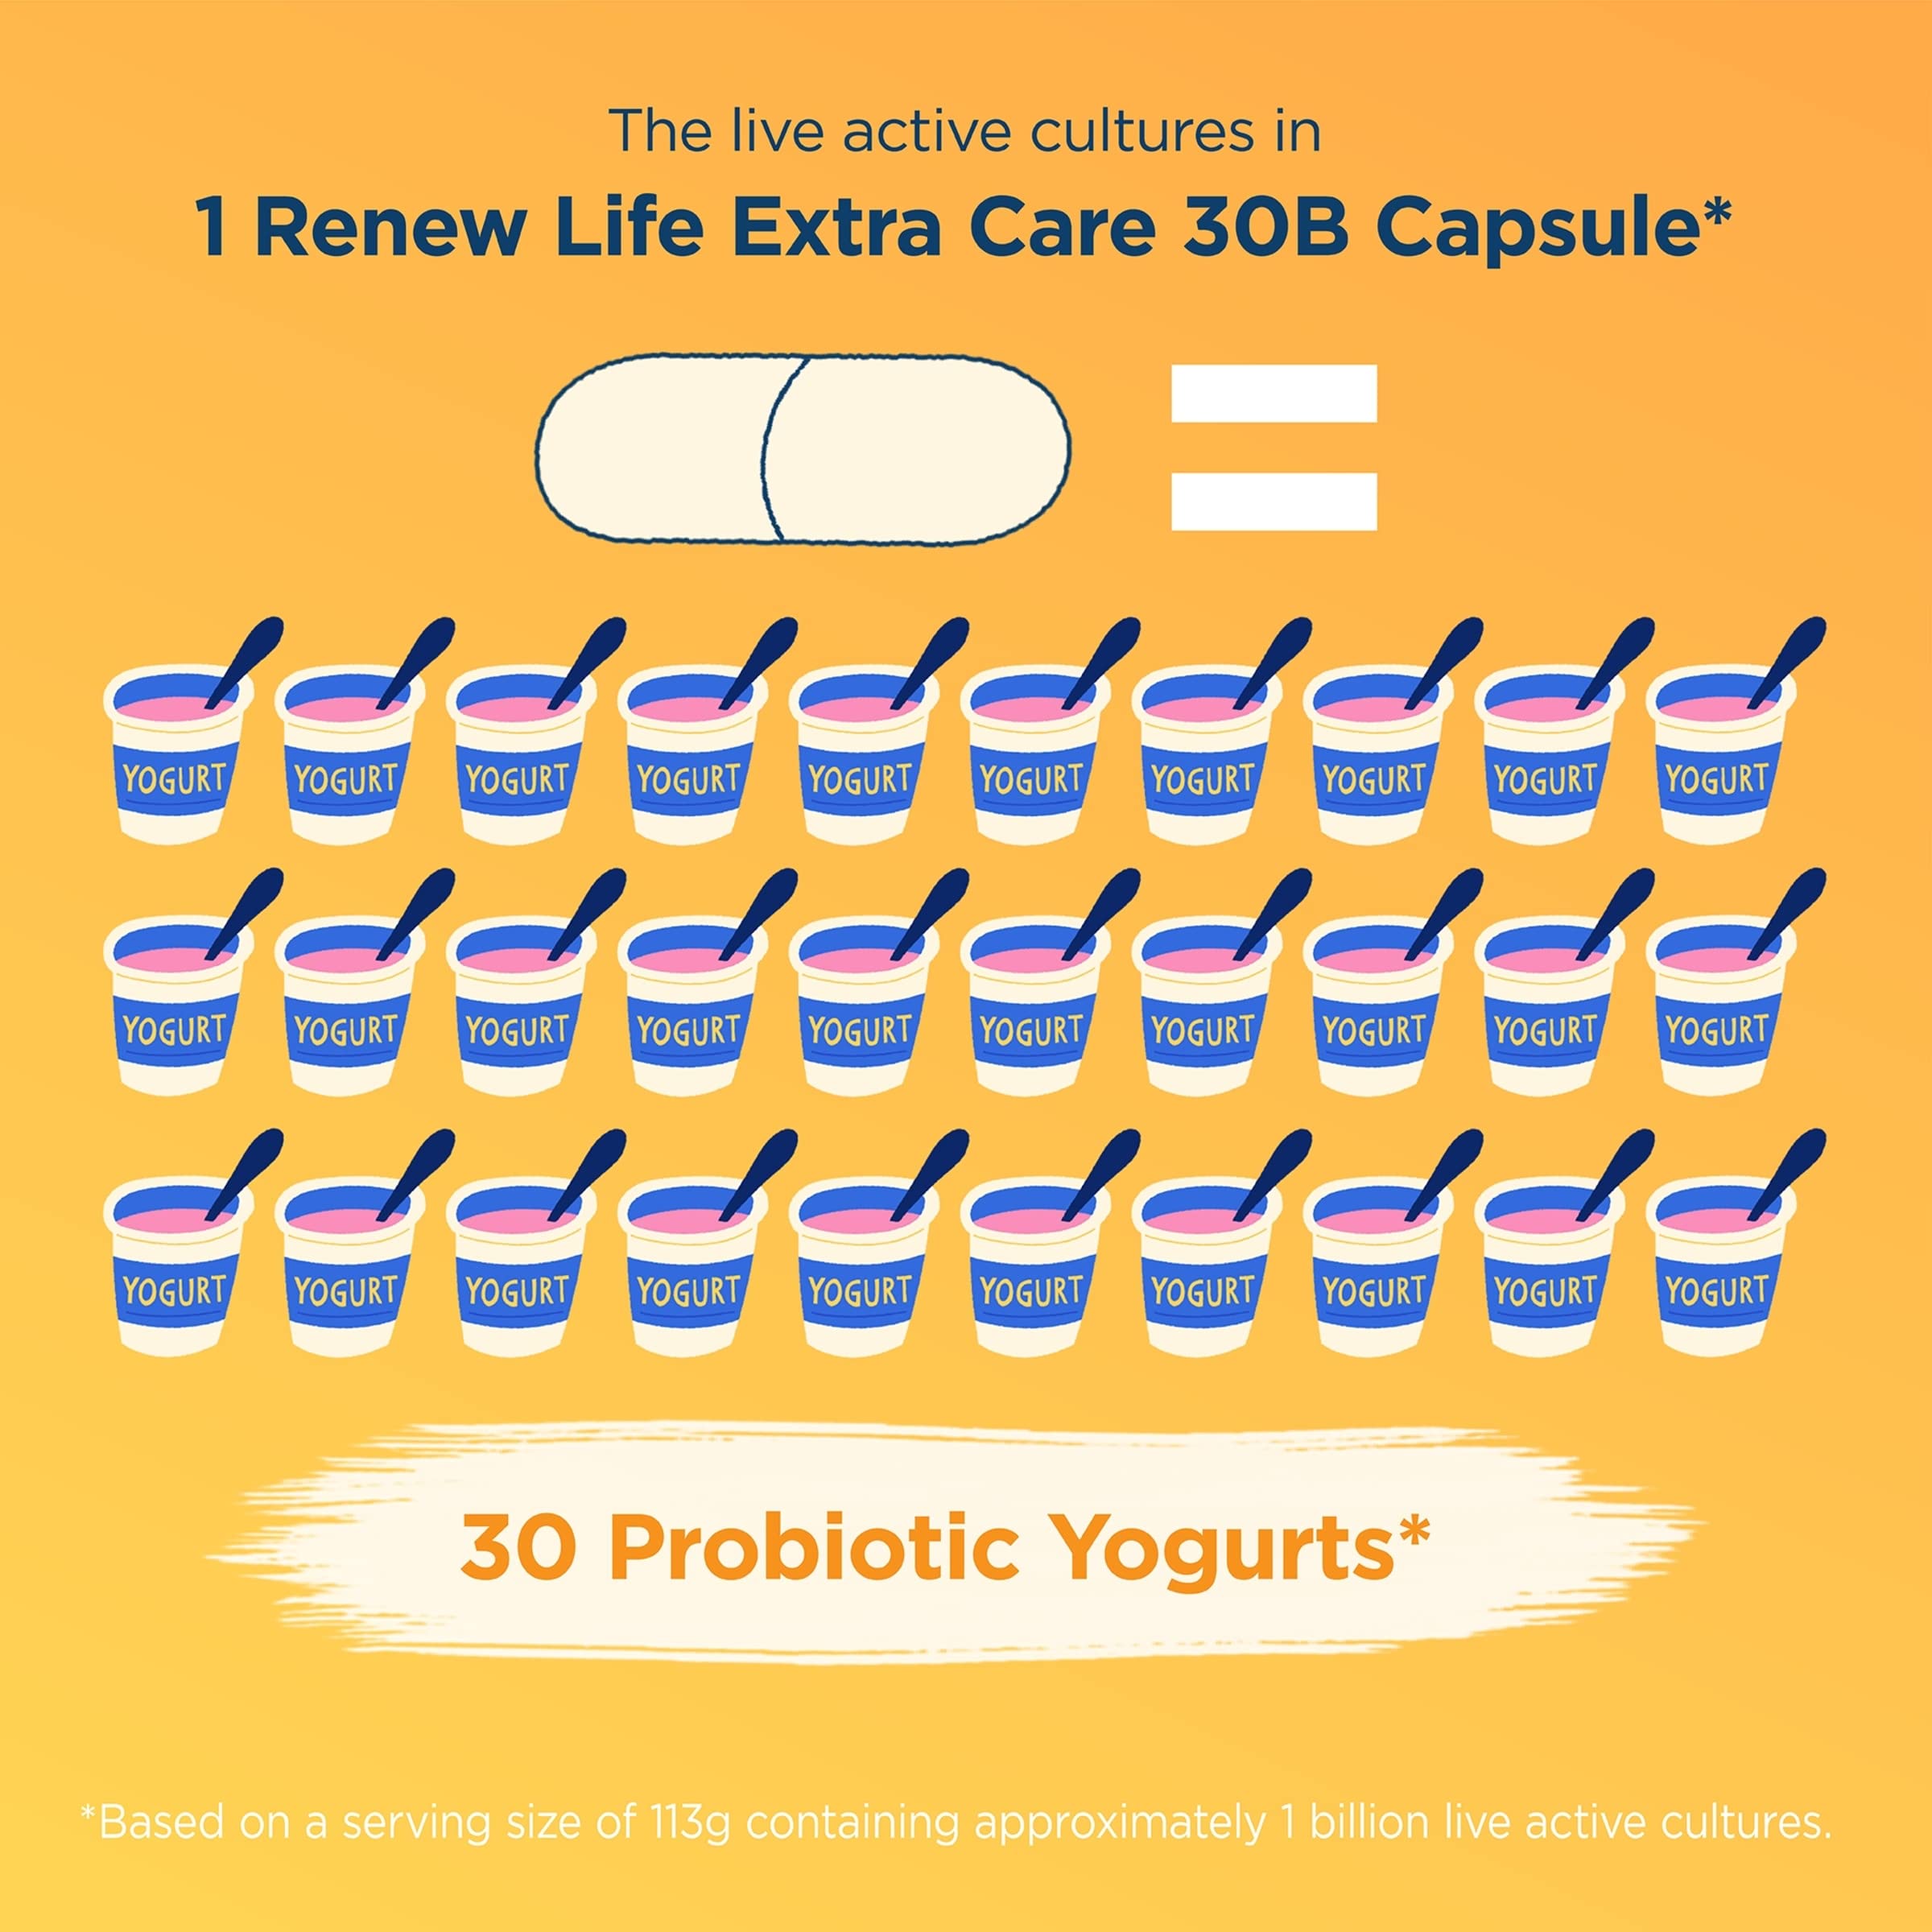 Renew Life Adult Probiotics, 30 Billion CFU Guaranteed, Extra Care Go-Pack, Probiotic Supplement for Digestive & Immune Health, Shelf Stable, Gluten Dairy & Soy Free, 30 Capsules